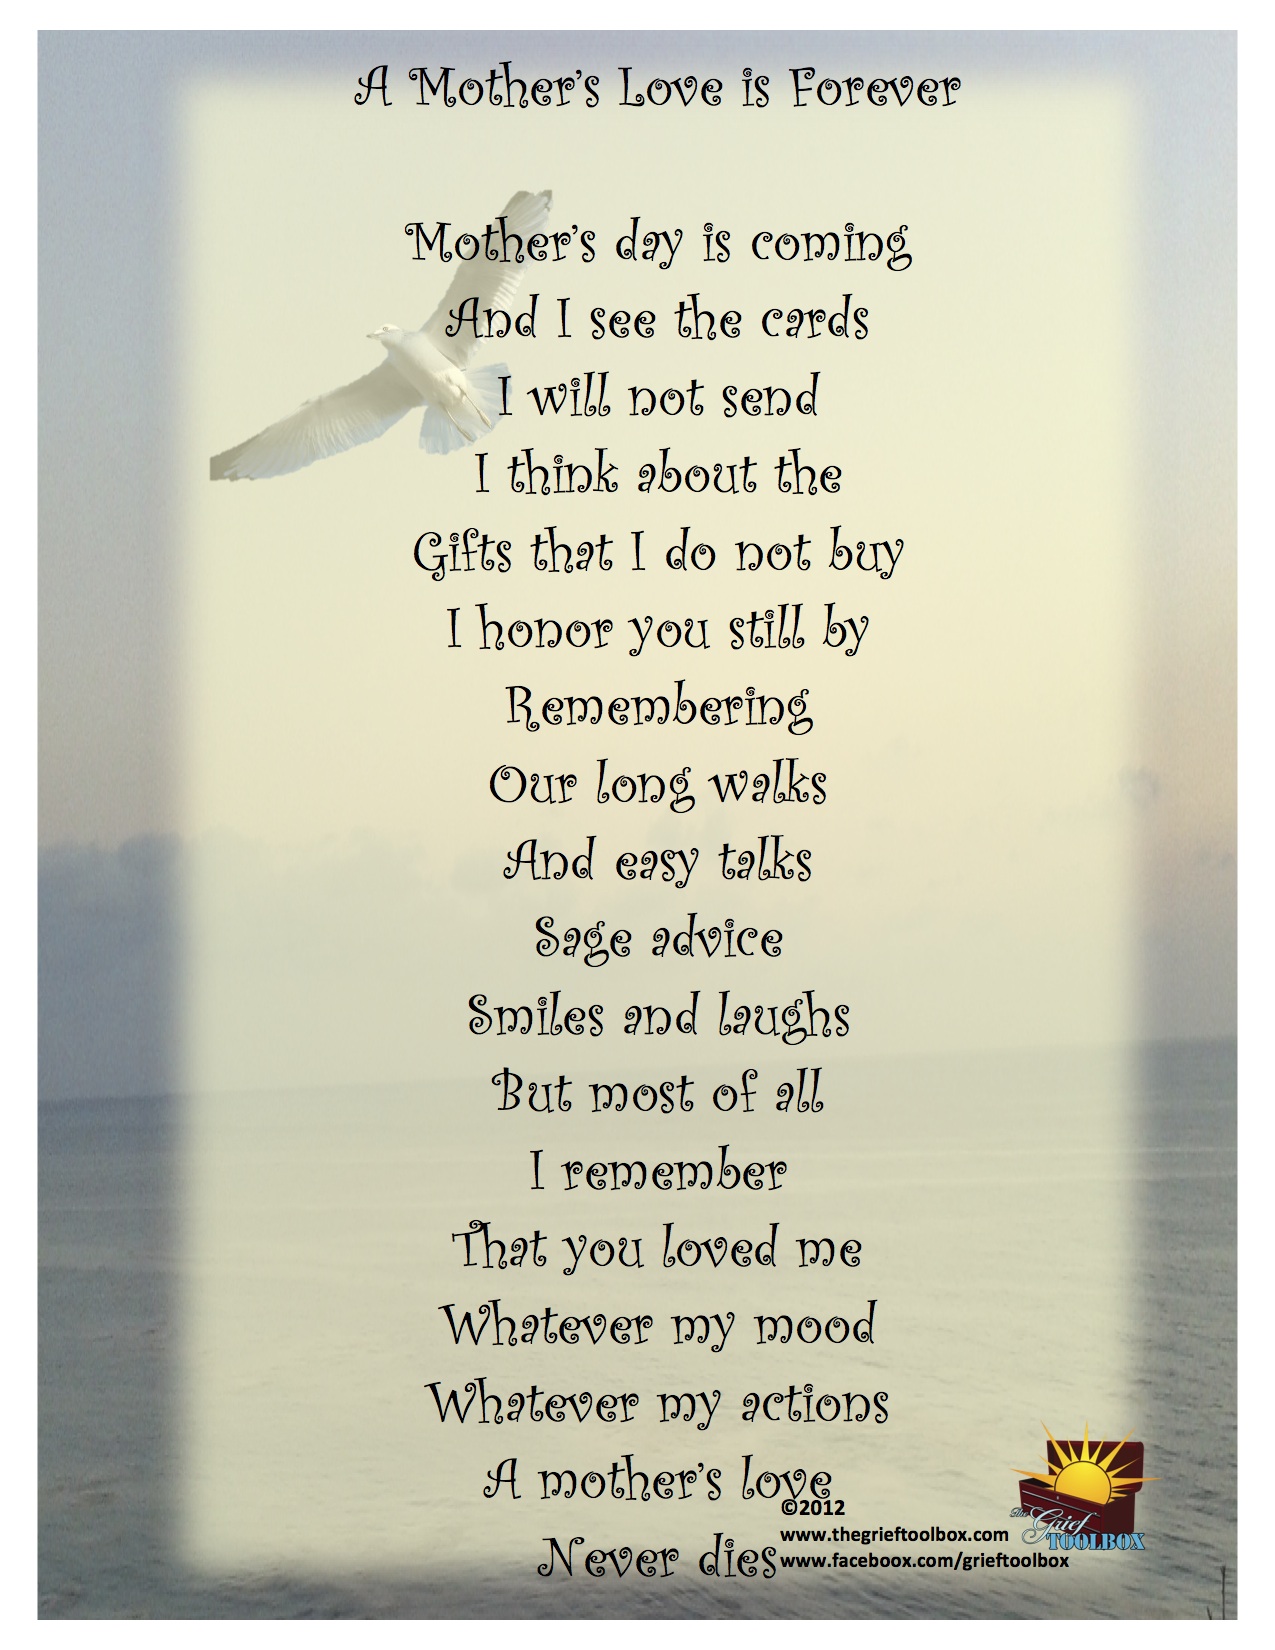 Remembering Mom | The Grief Toolbox